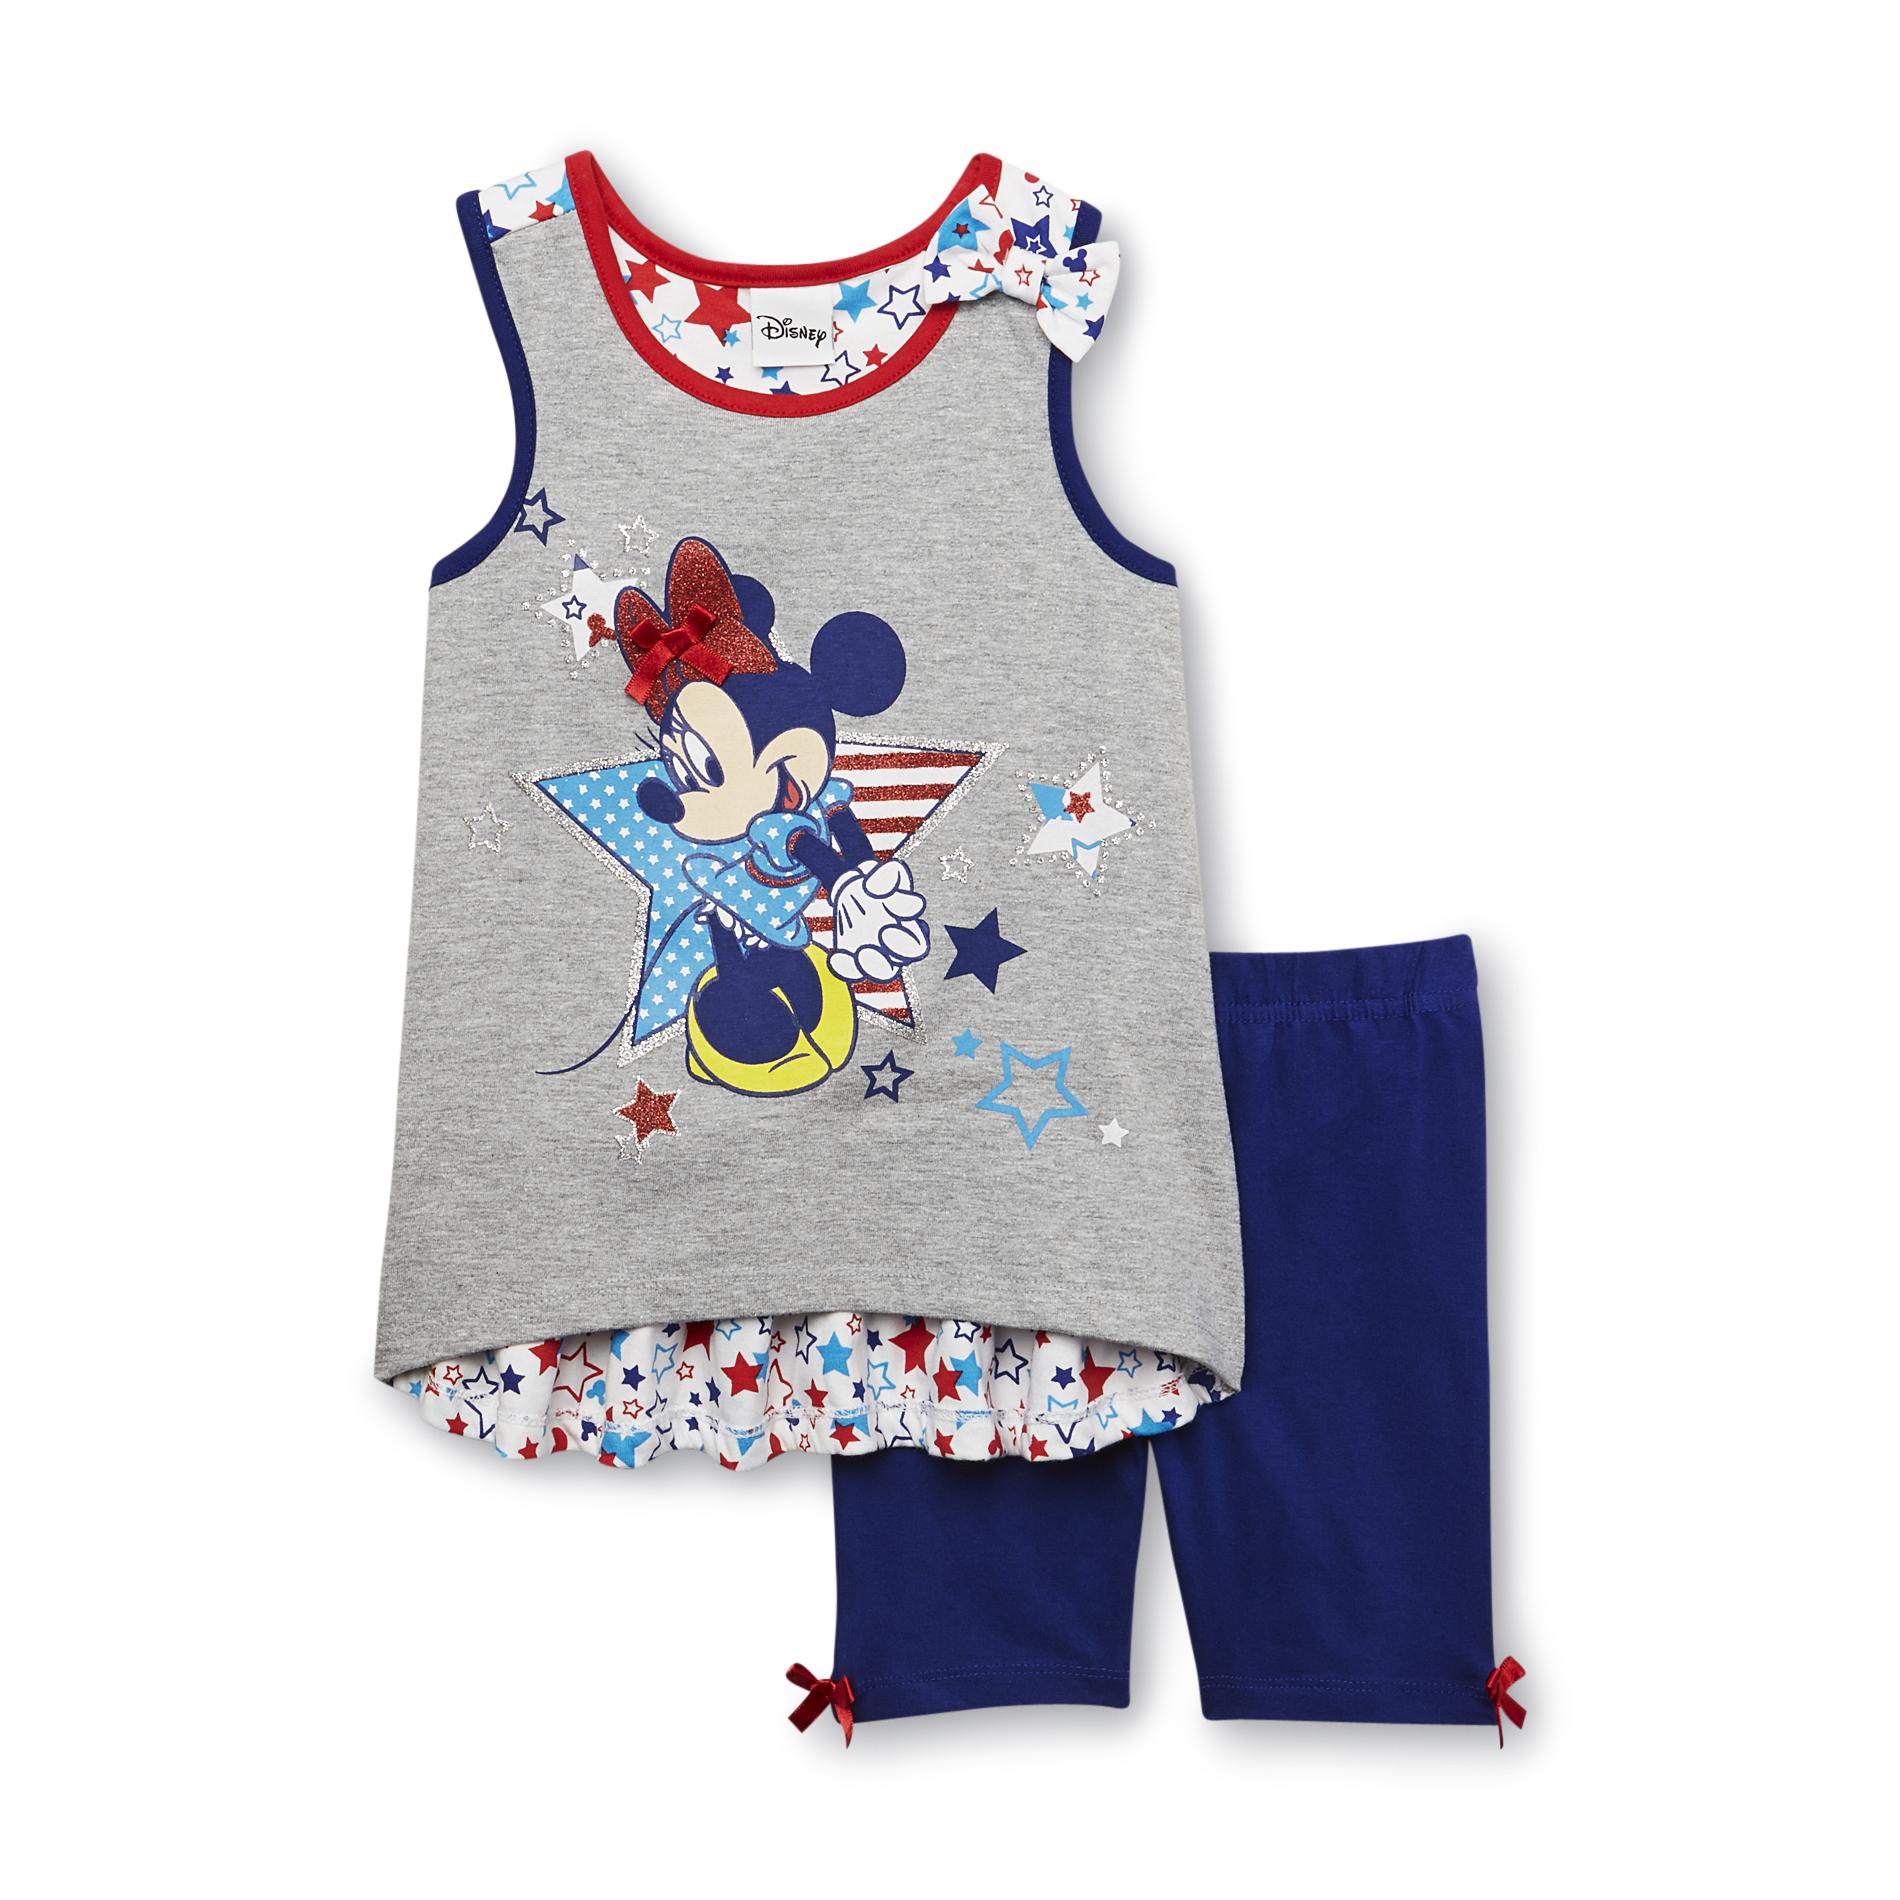 Disney Infant & Toddler Girl's Tank Top & Shorts - Minnie Mouse